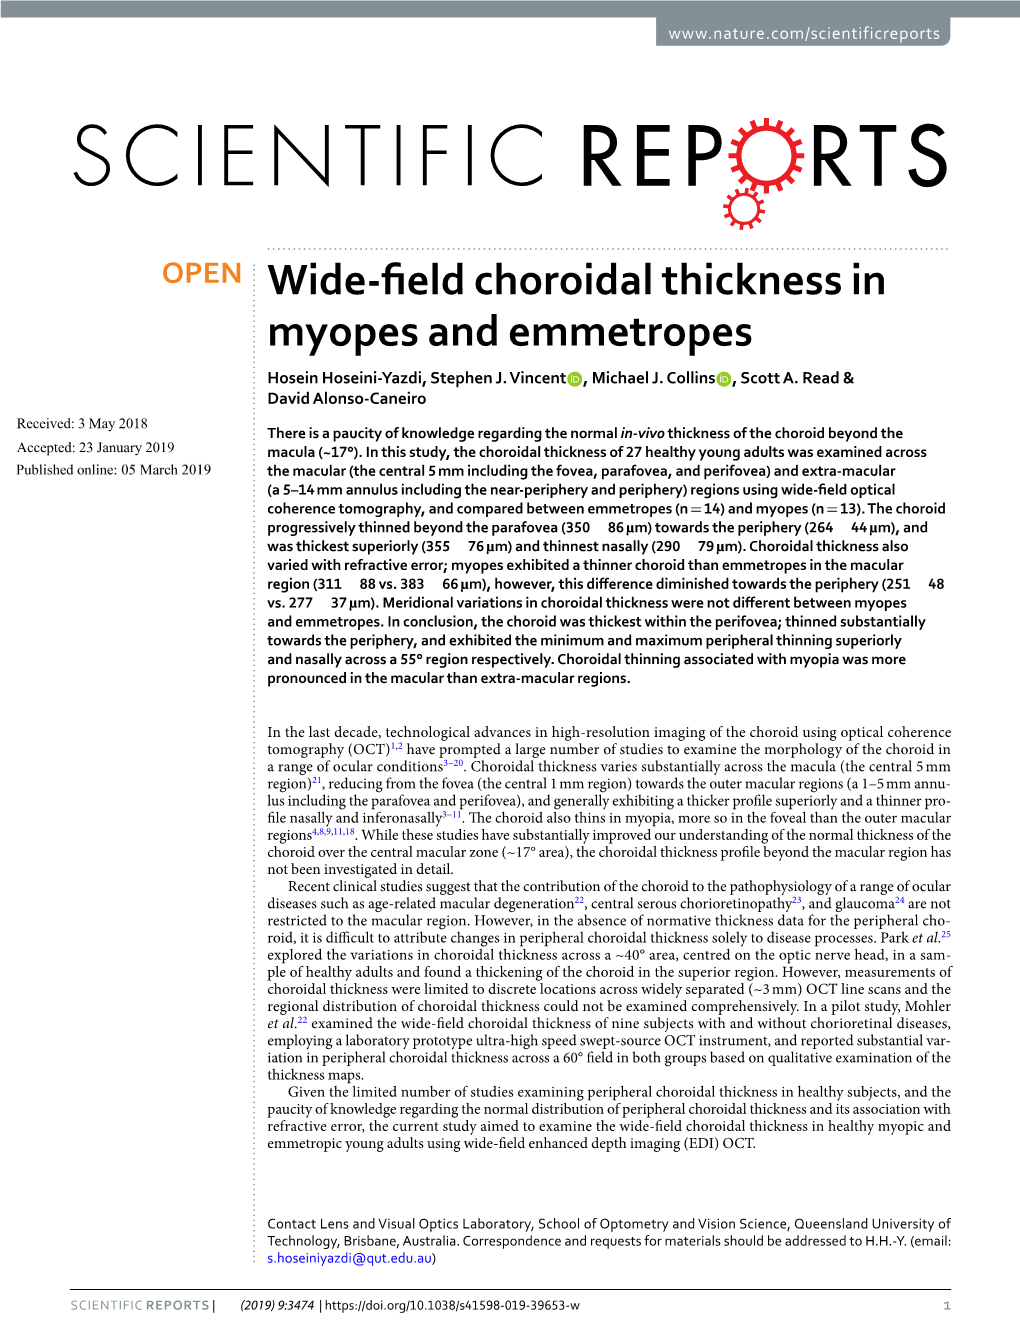 Wide-Field Choroidal Thickness in Myopes and Emmetropes